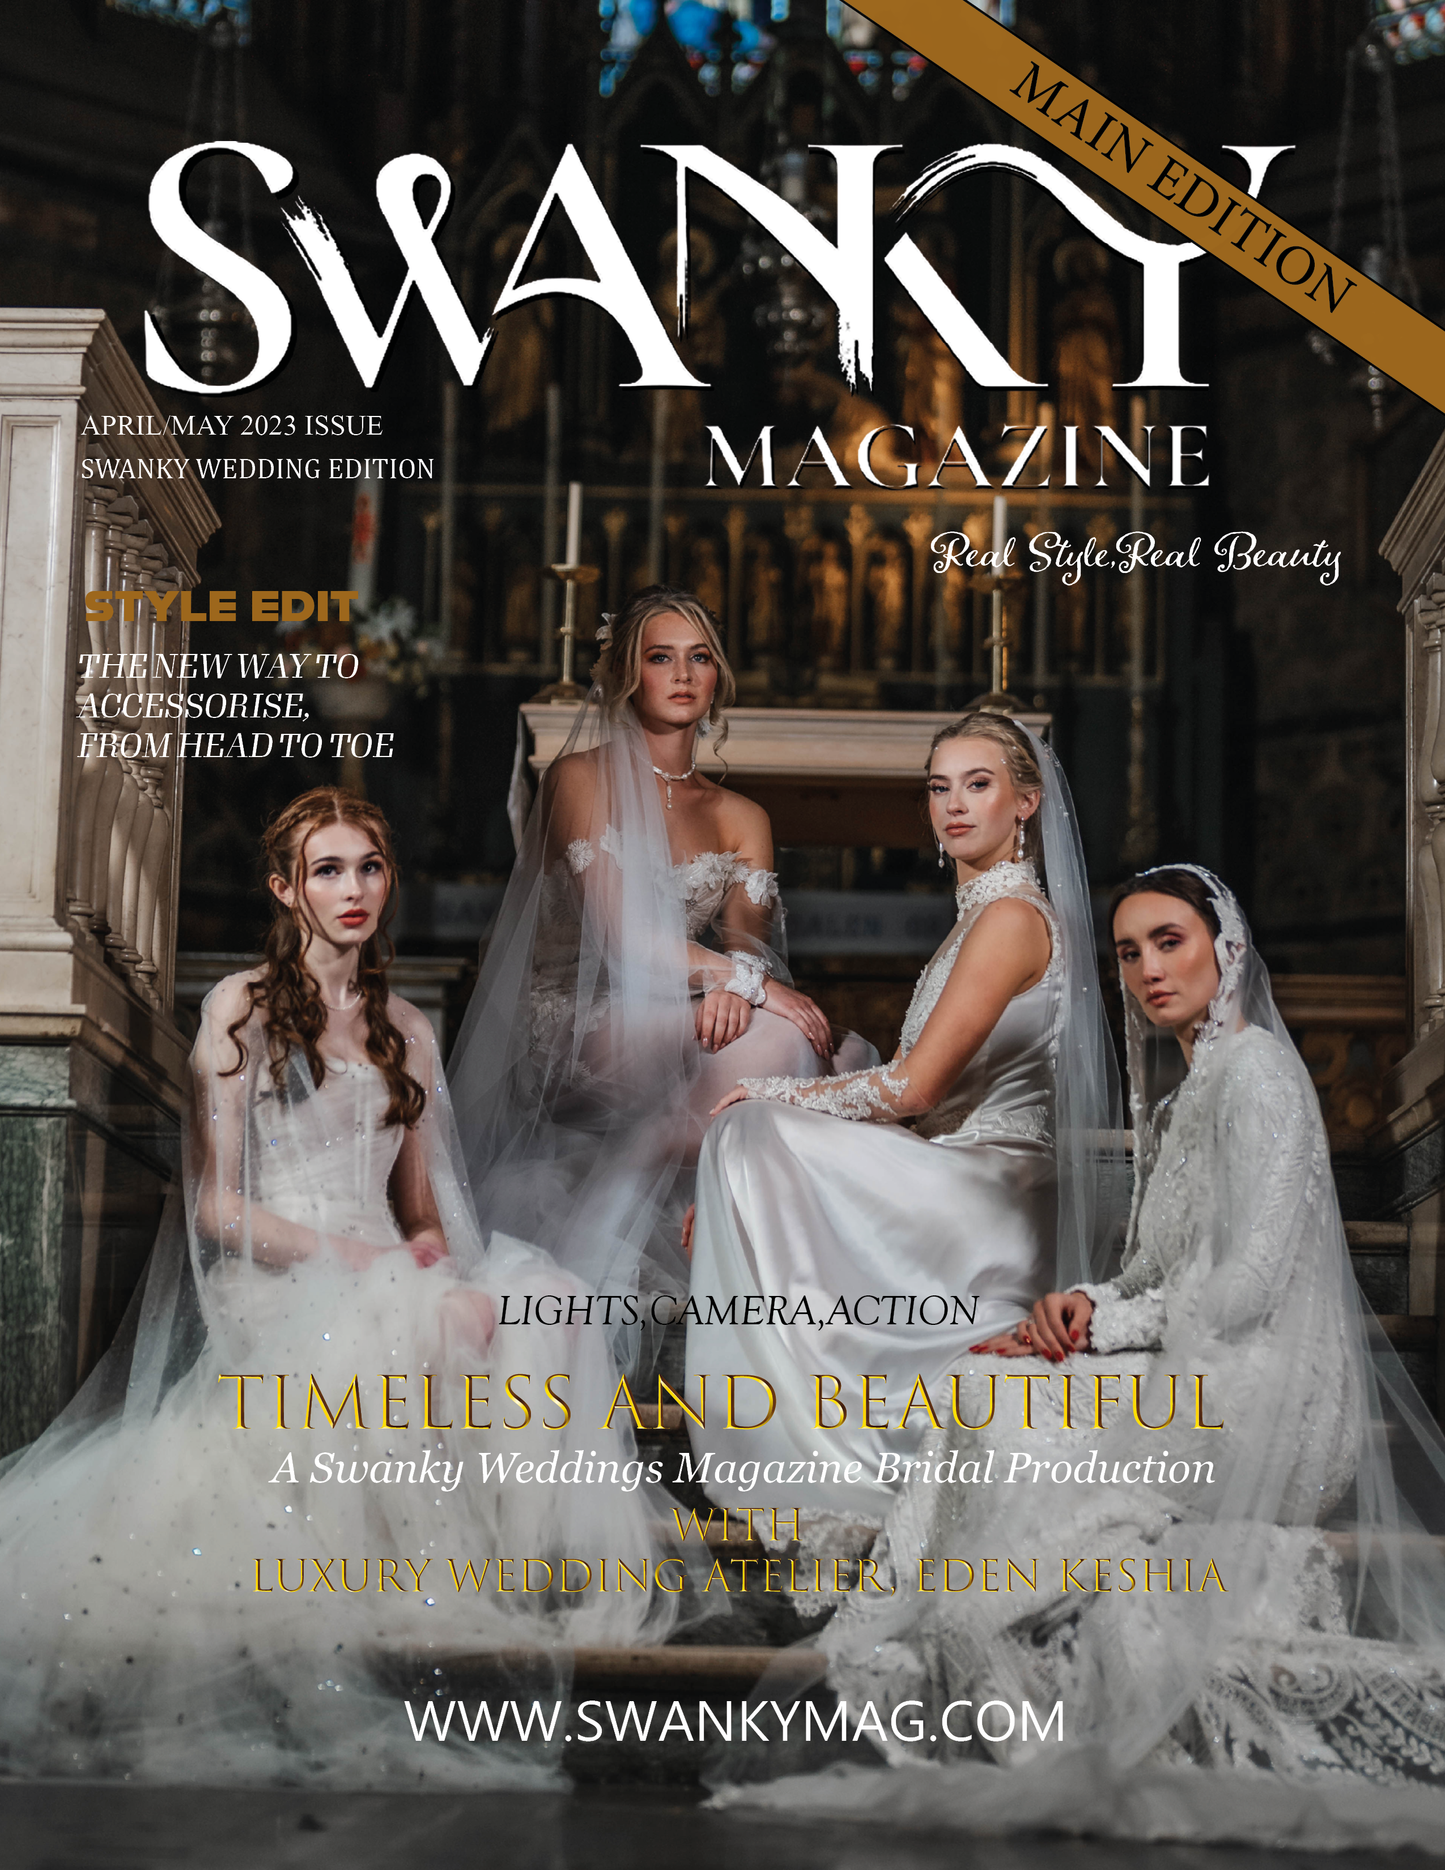 Swanky Wedding Edition April/May 2023 Issue 01: The Main Issue